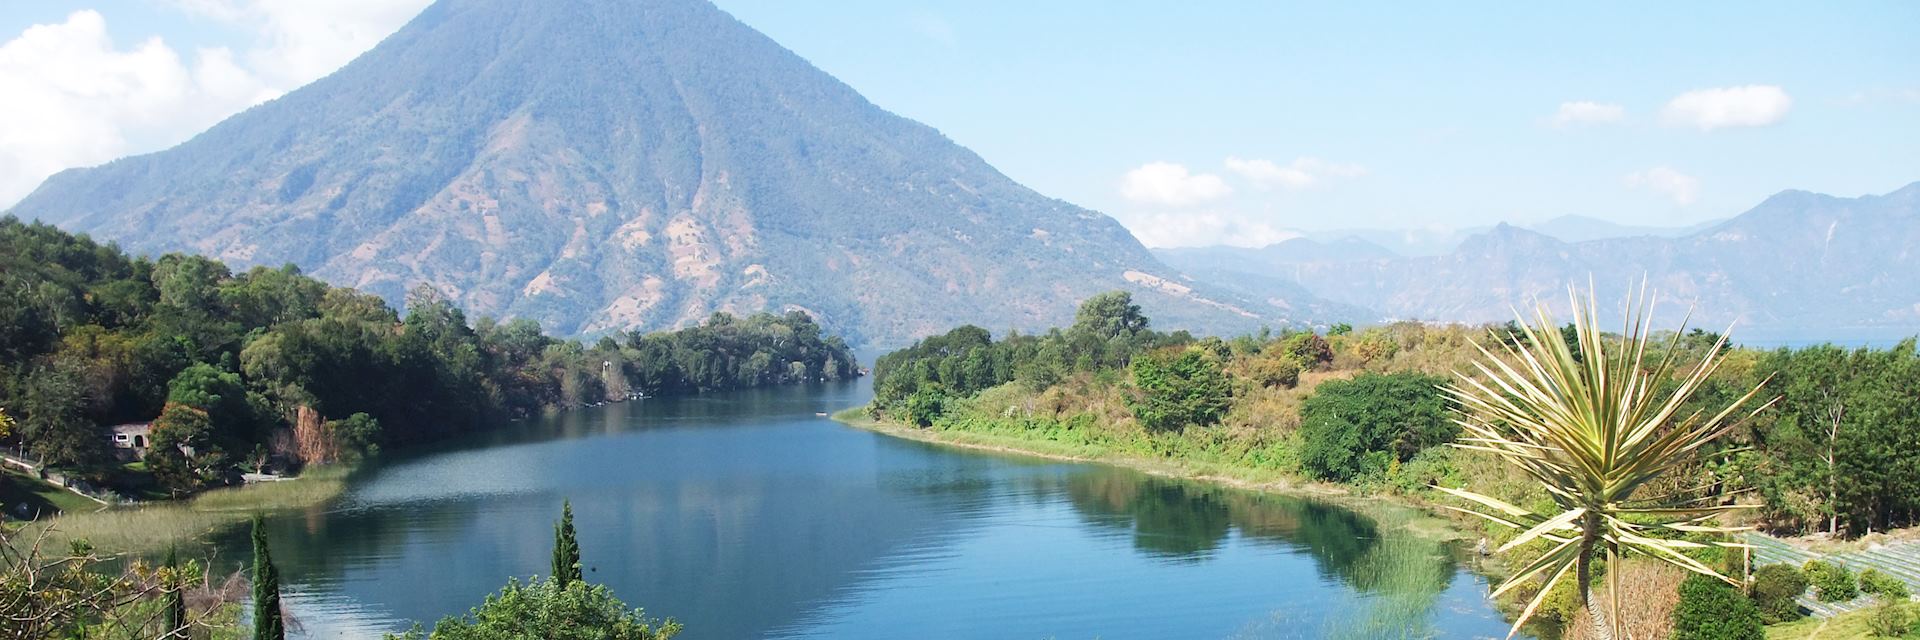 Best Time to Visit Guatemala | Climate Guide | Audley Travel